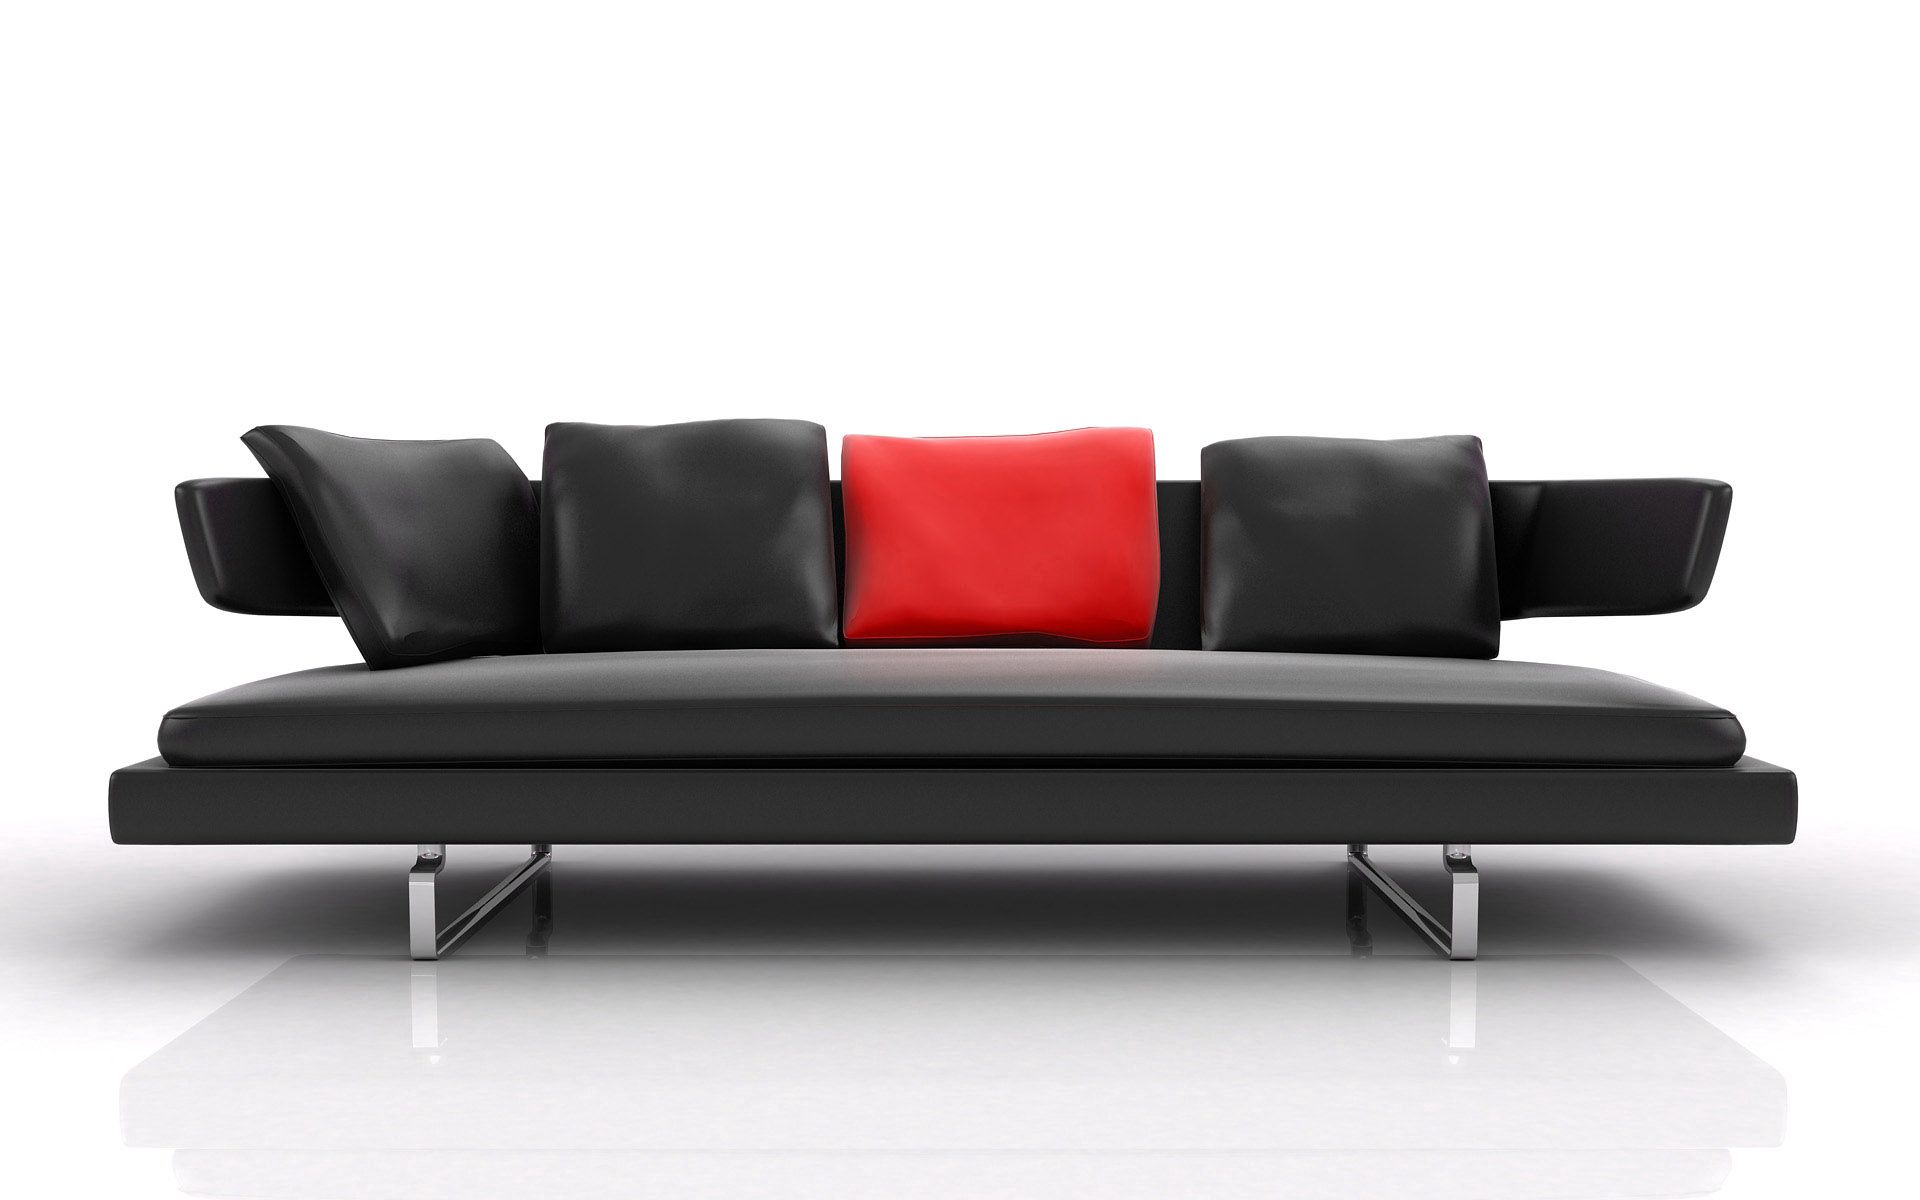 furniture, miscellanea, miscellaneous, style, sofa, modern, up to date, cushions, pillows for android